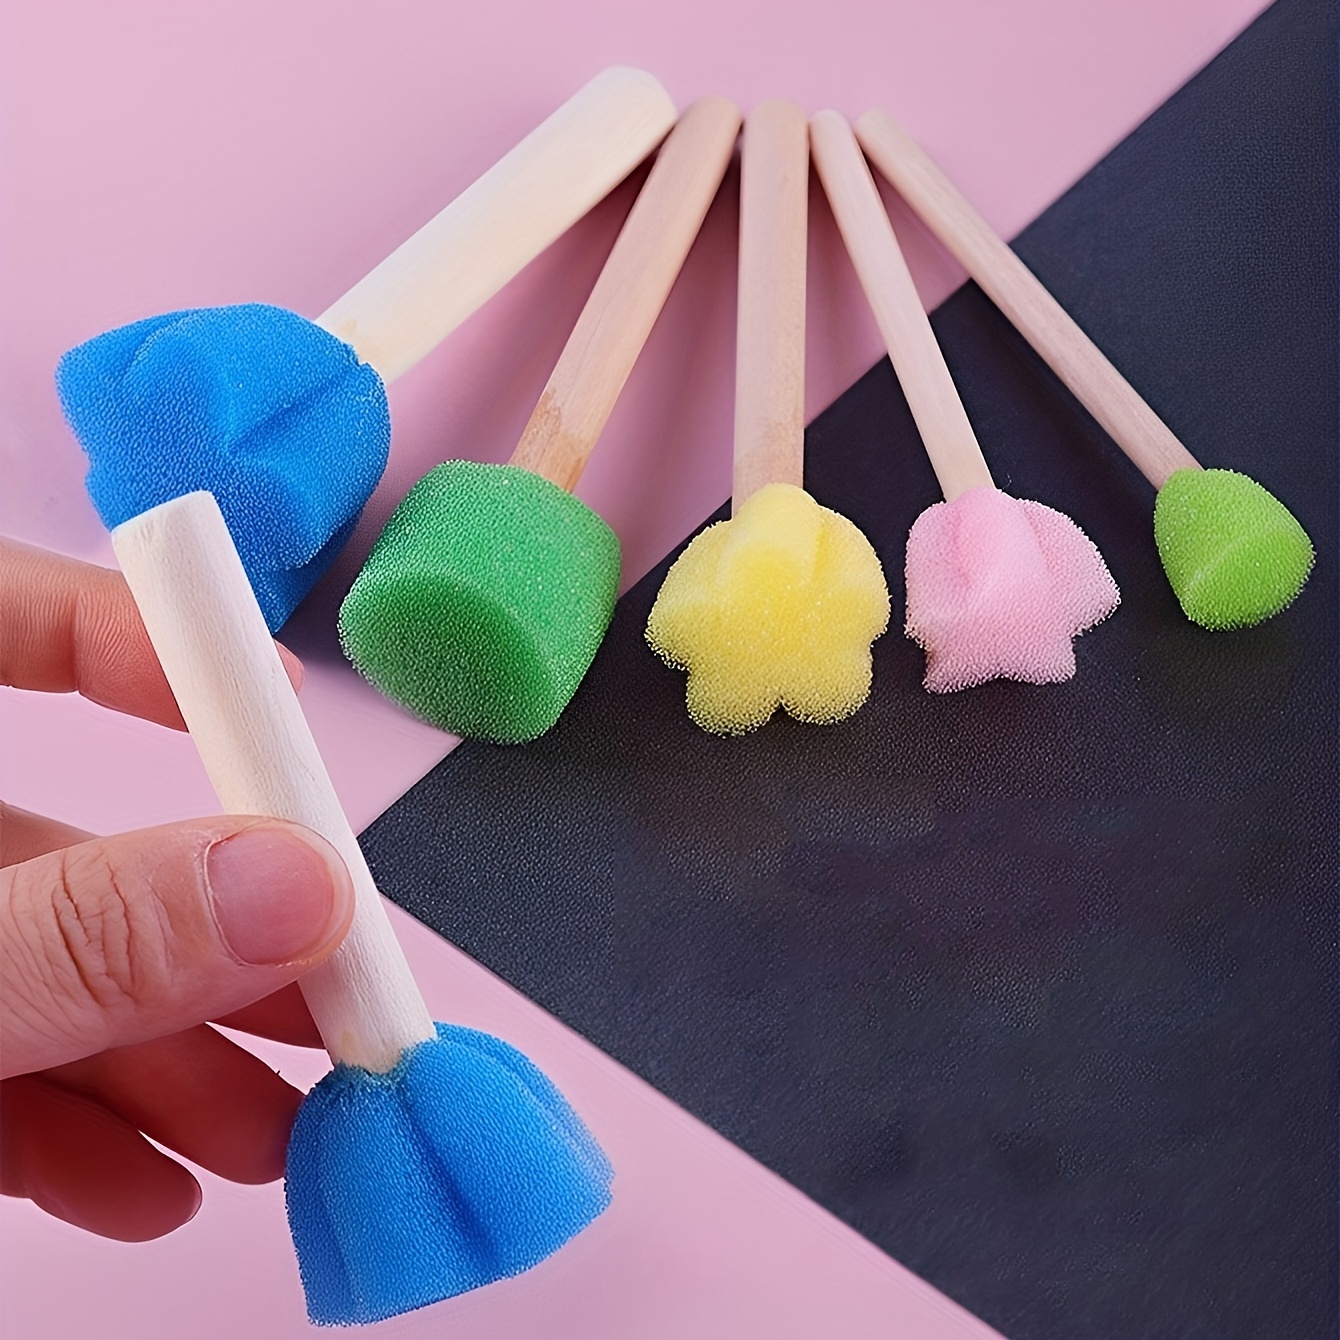 60pcs Assorted Round Paint Foam Sponge Brush Set Painting Tools Brush Set - Great for Kids Arts and Crafts Stencils Painting